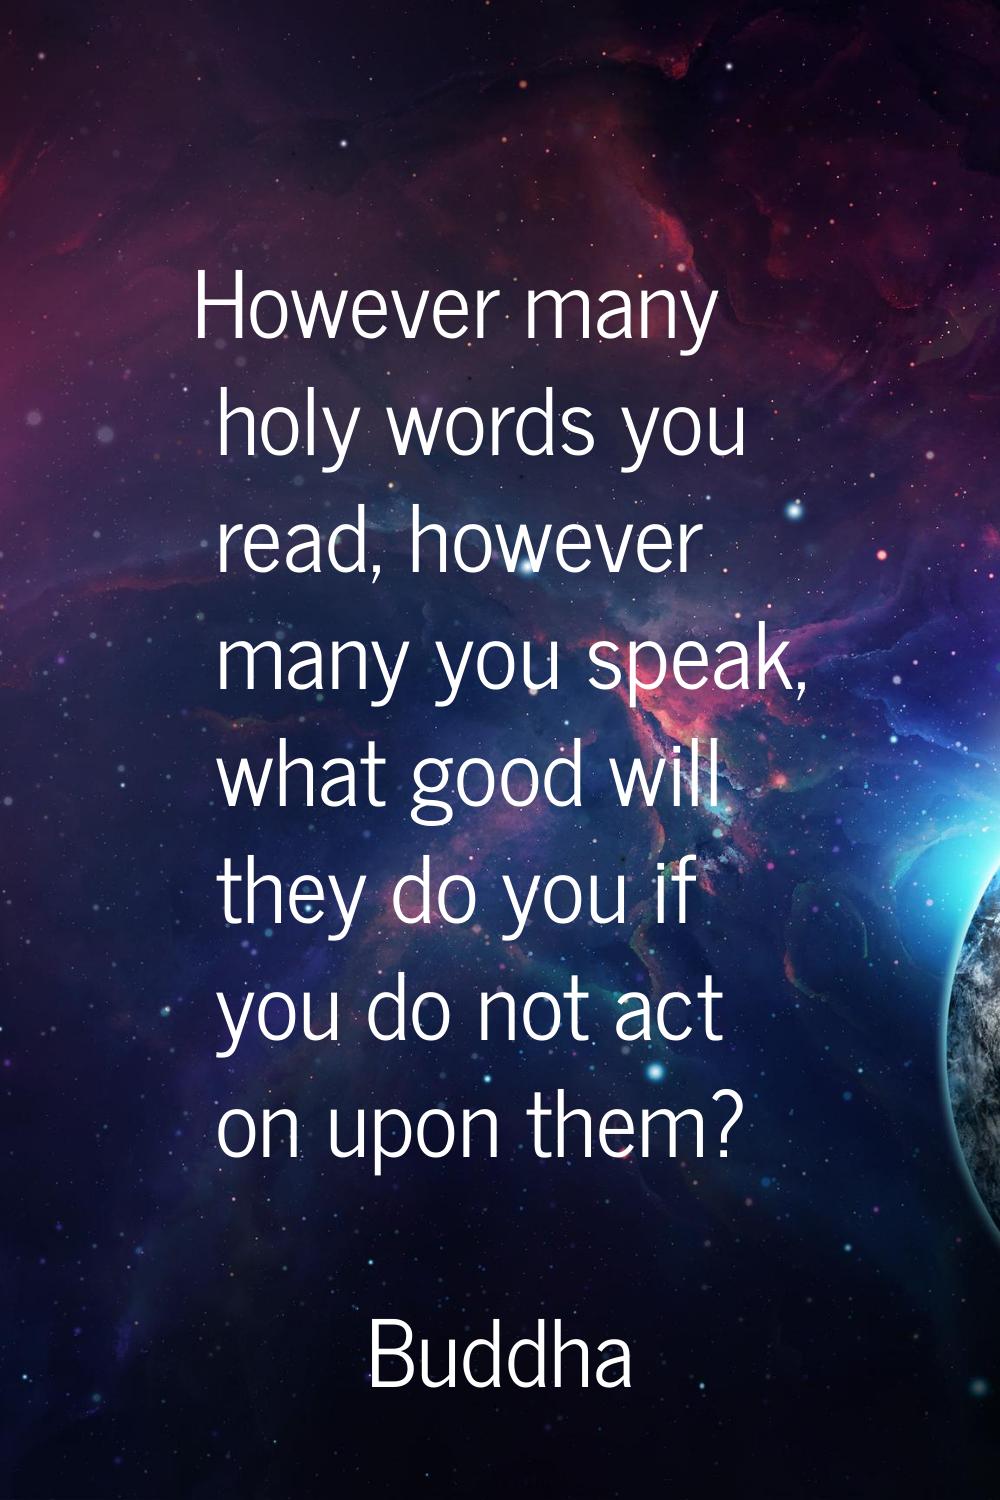 However many holy words you read, however many you speak, what good will they do you if you do not 